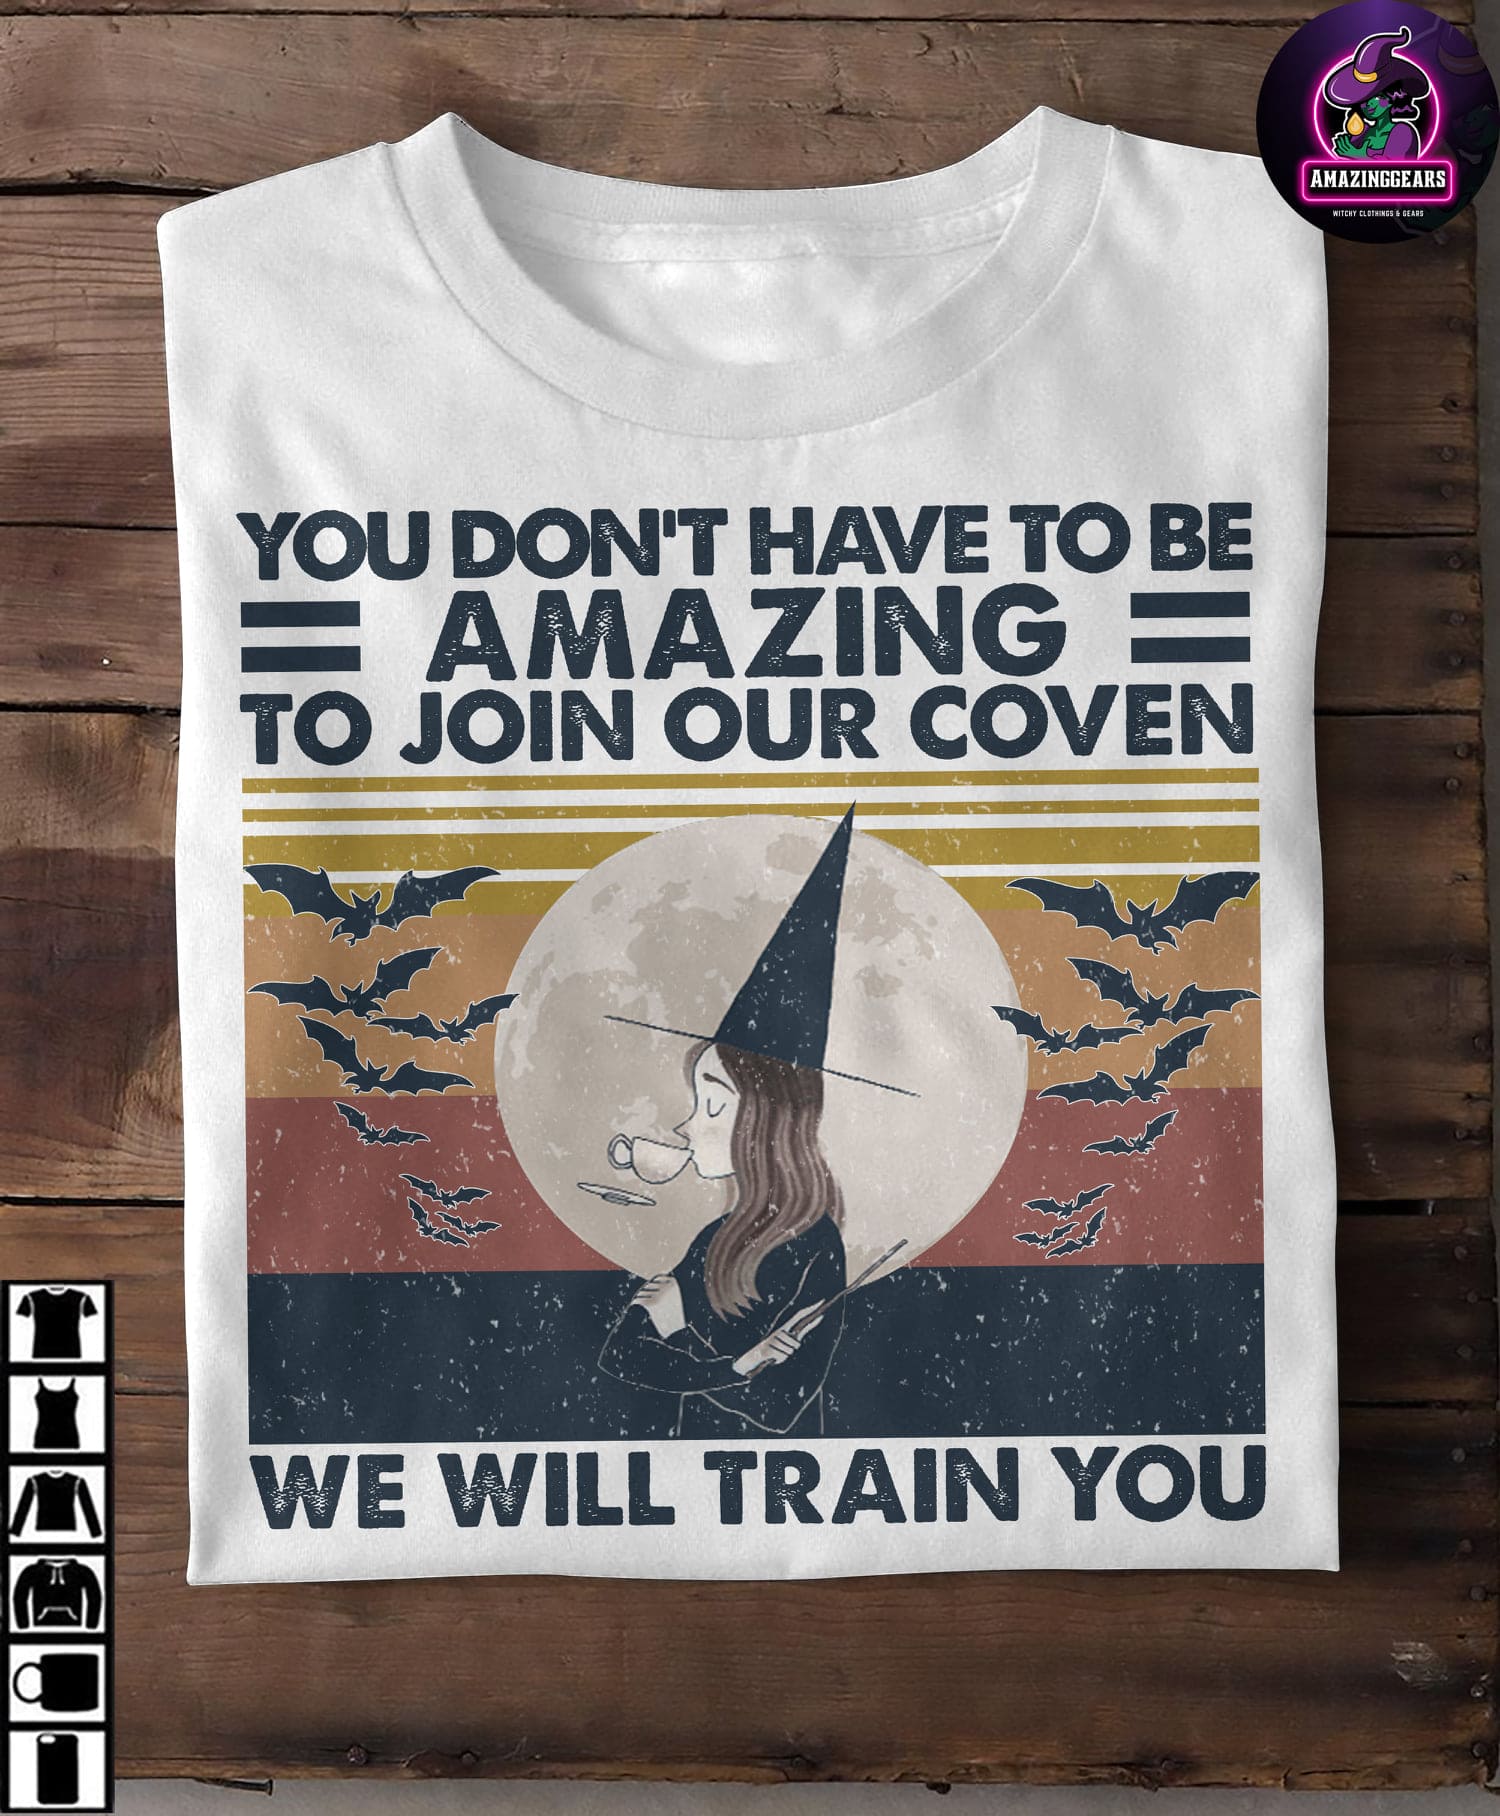 You don't have to be amazing to join our coven, we will train you - Funny Halloween T-shirt, Witch and bat